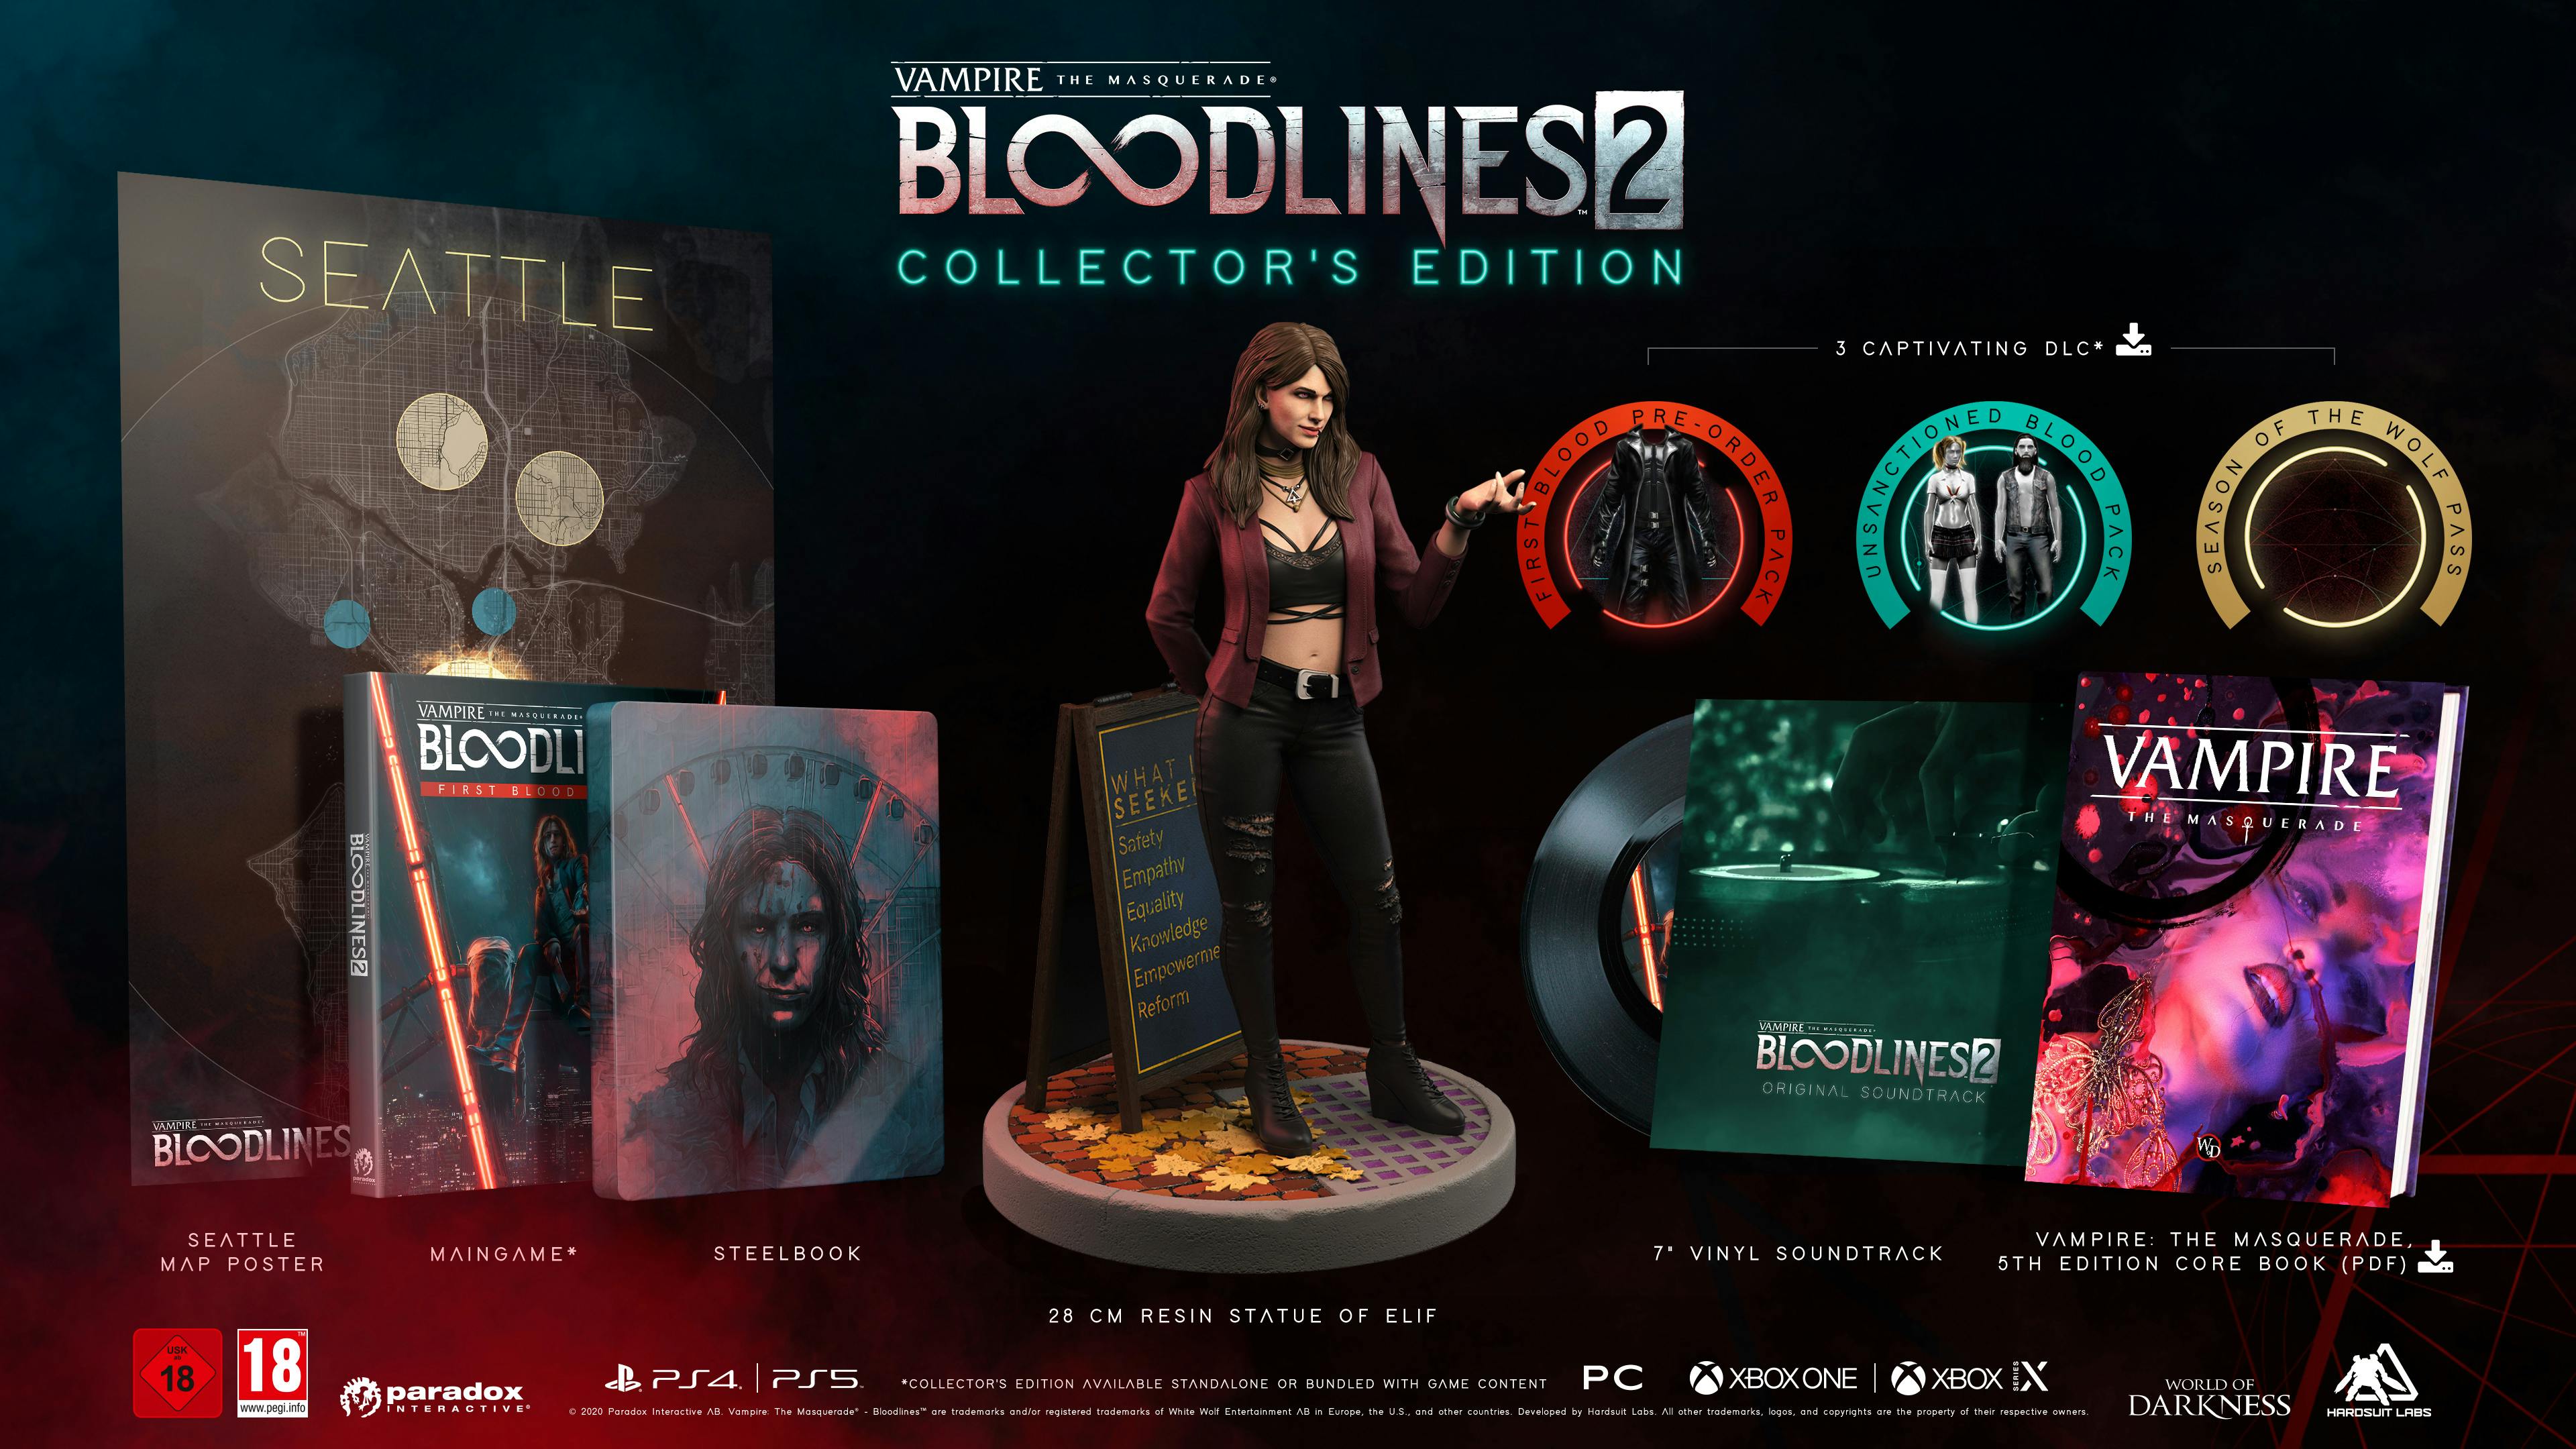 The Collector's Edition of Vampire: the Masquerade - Bloodlines 2 featured many physical collectibles, all of which are being refunded to current owners. 